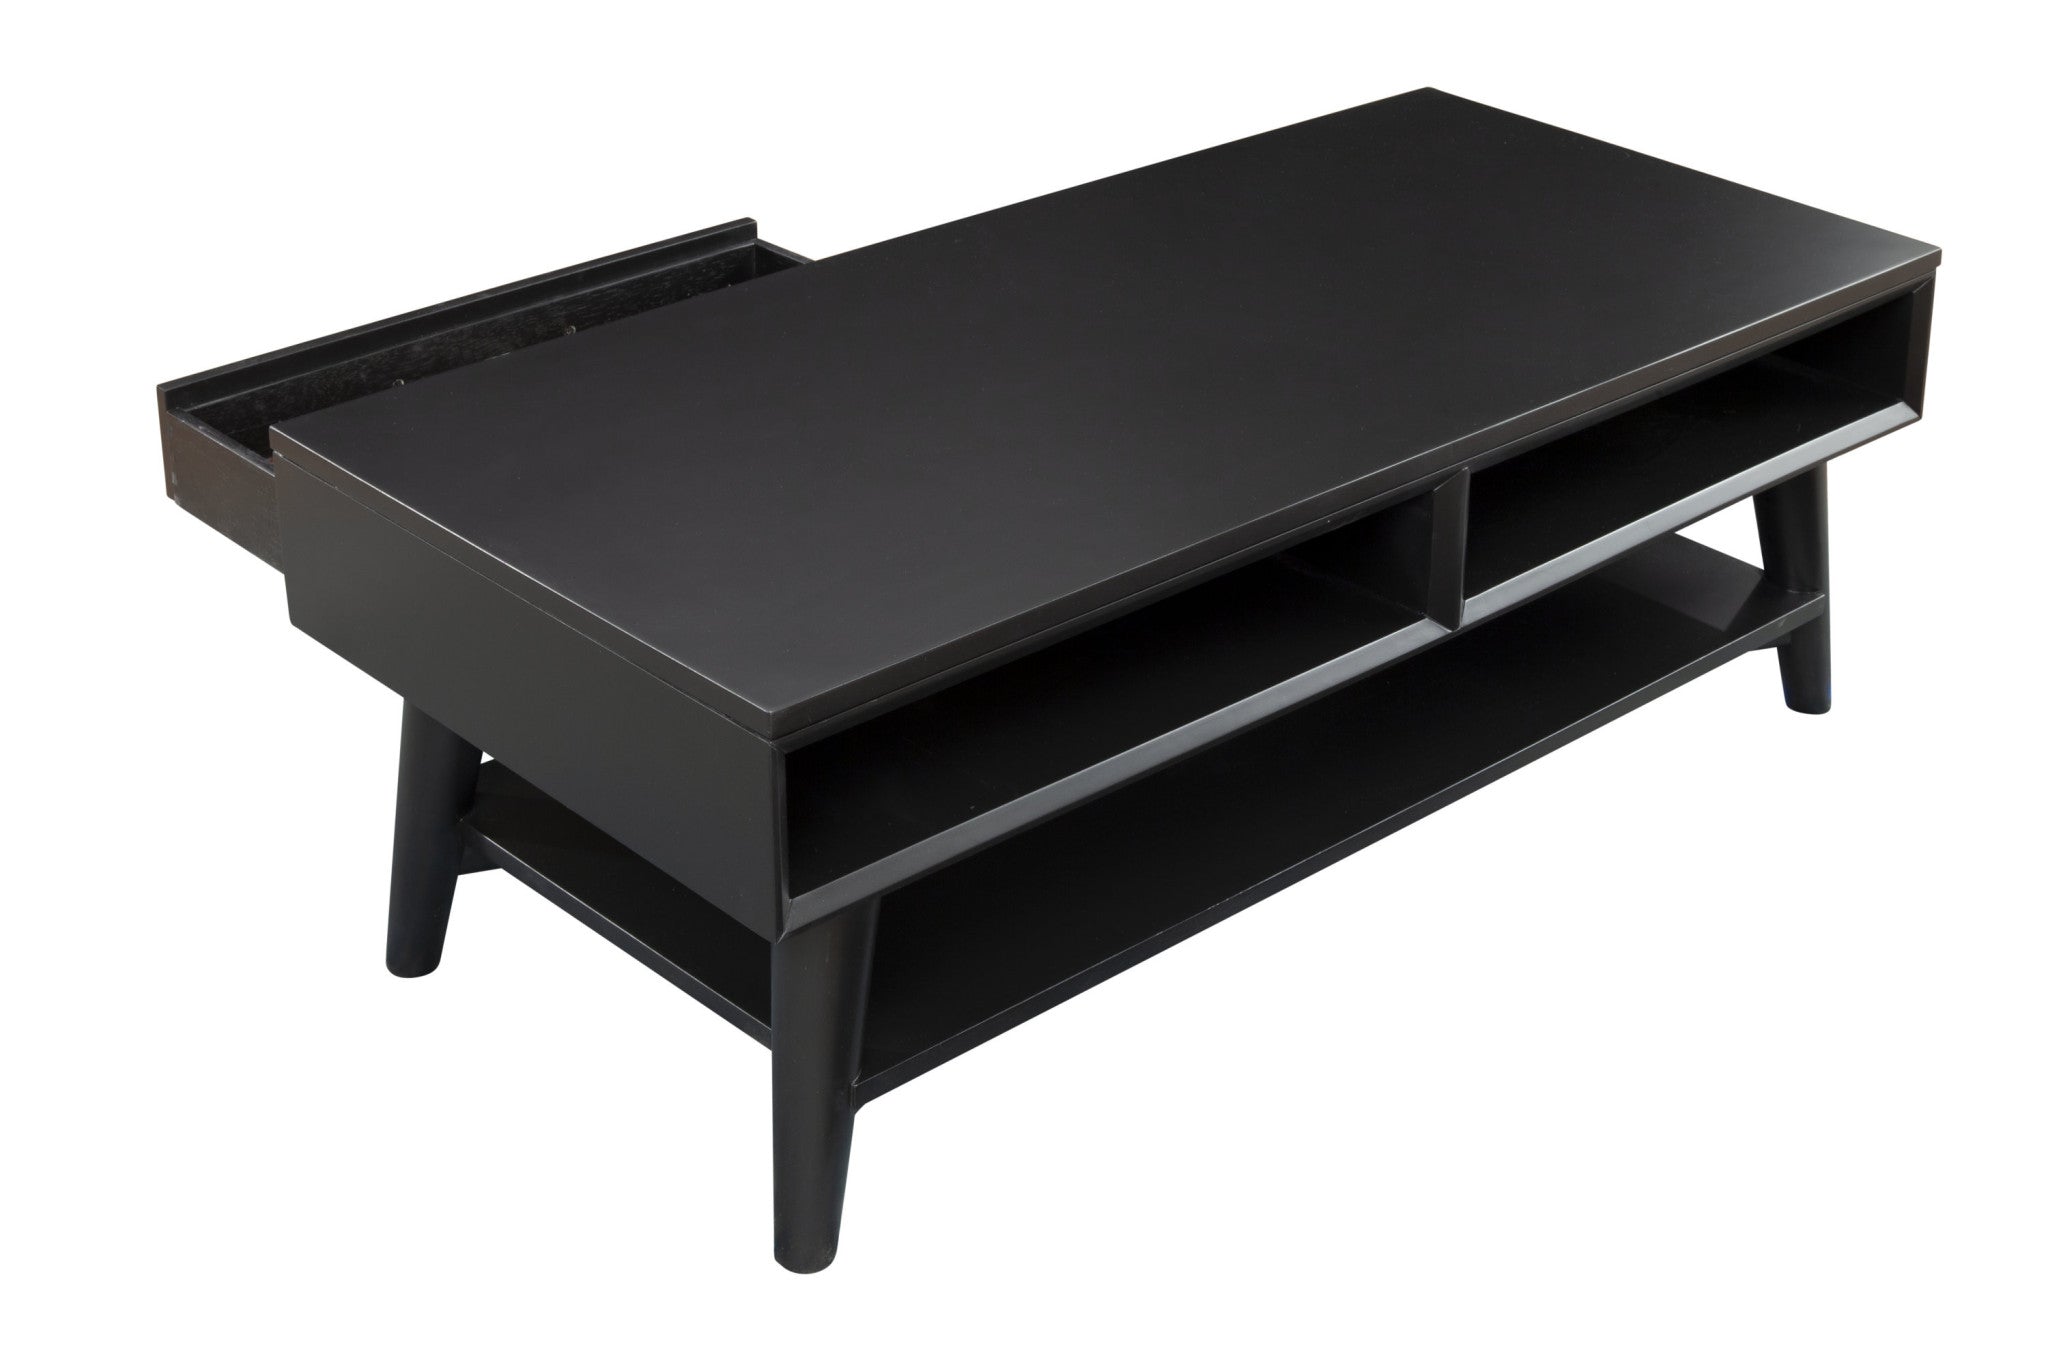 48" Black Solid And Manufactured Wood Coffee Table With Drawer